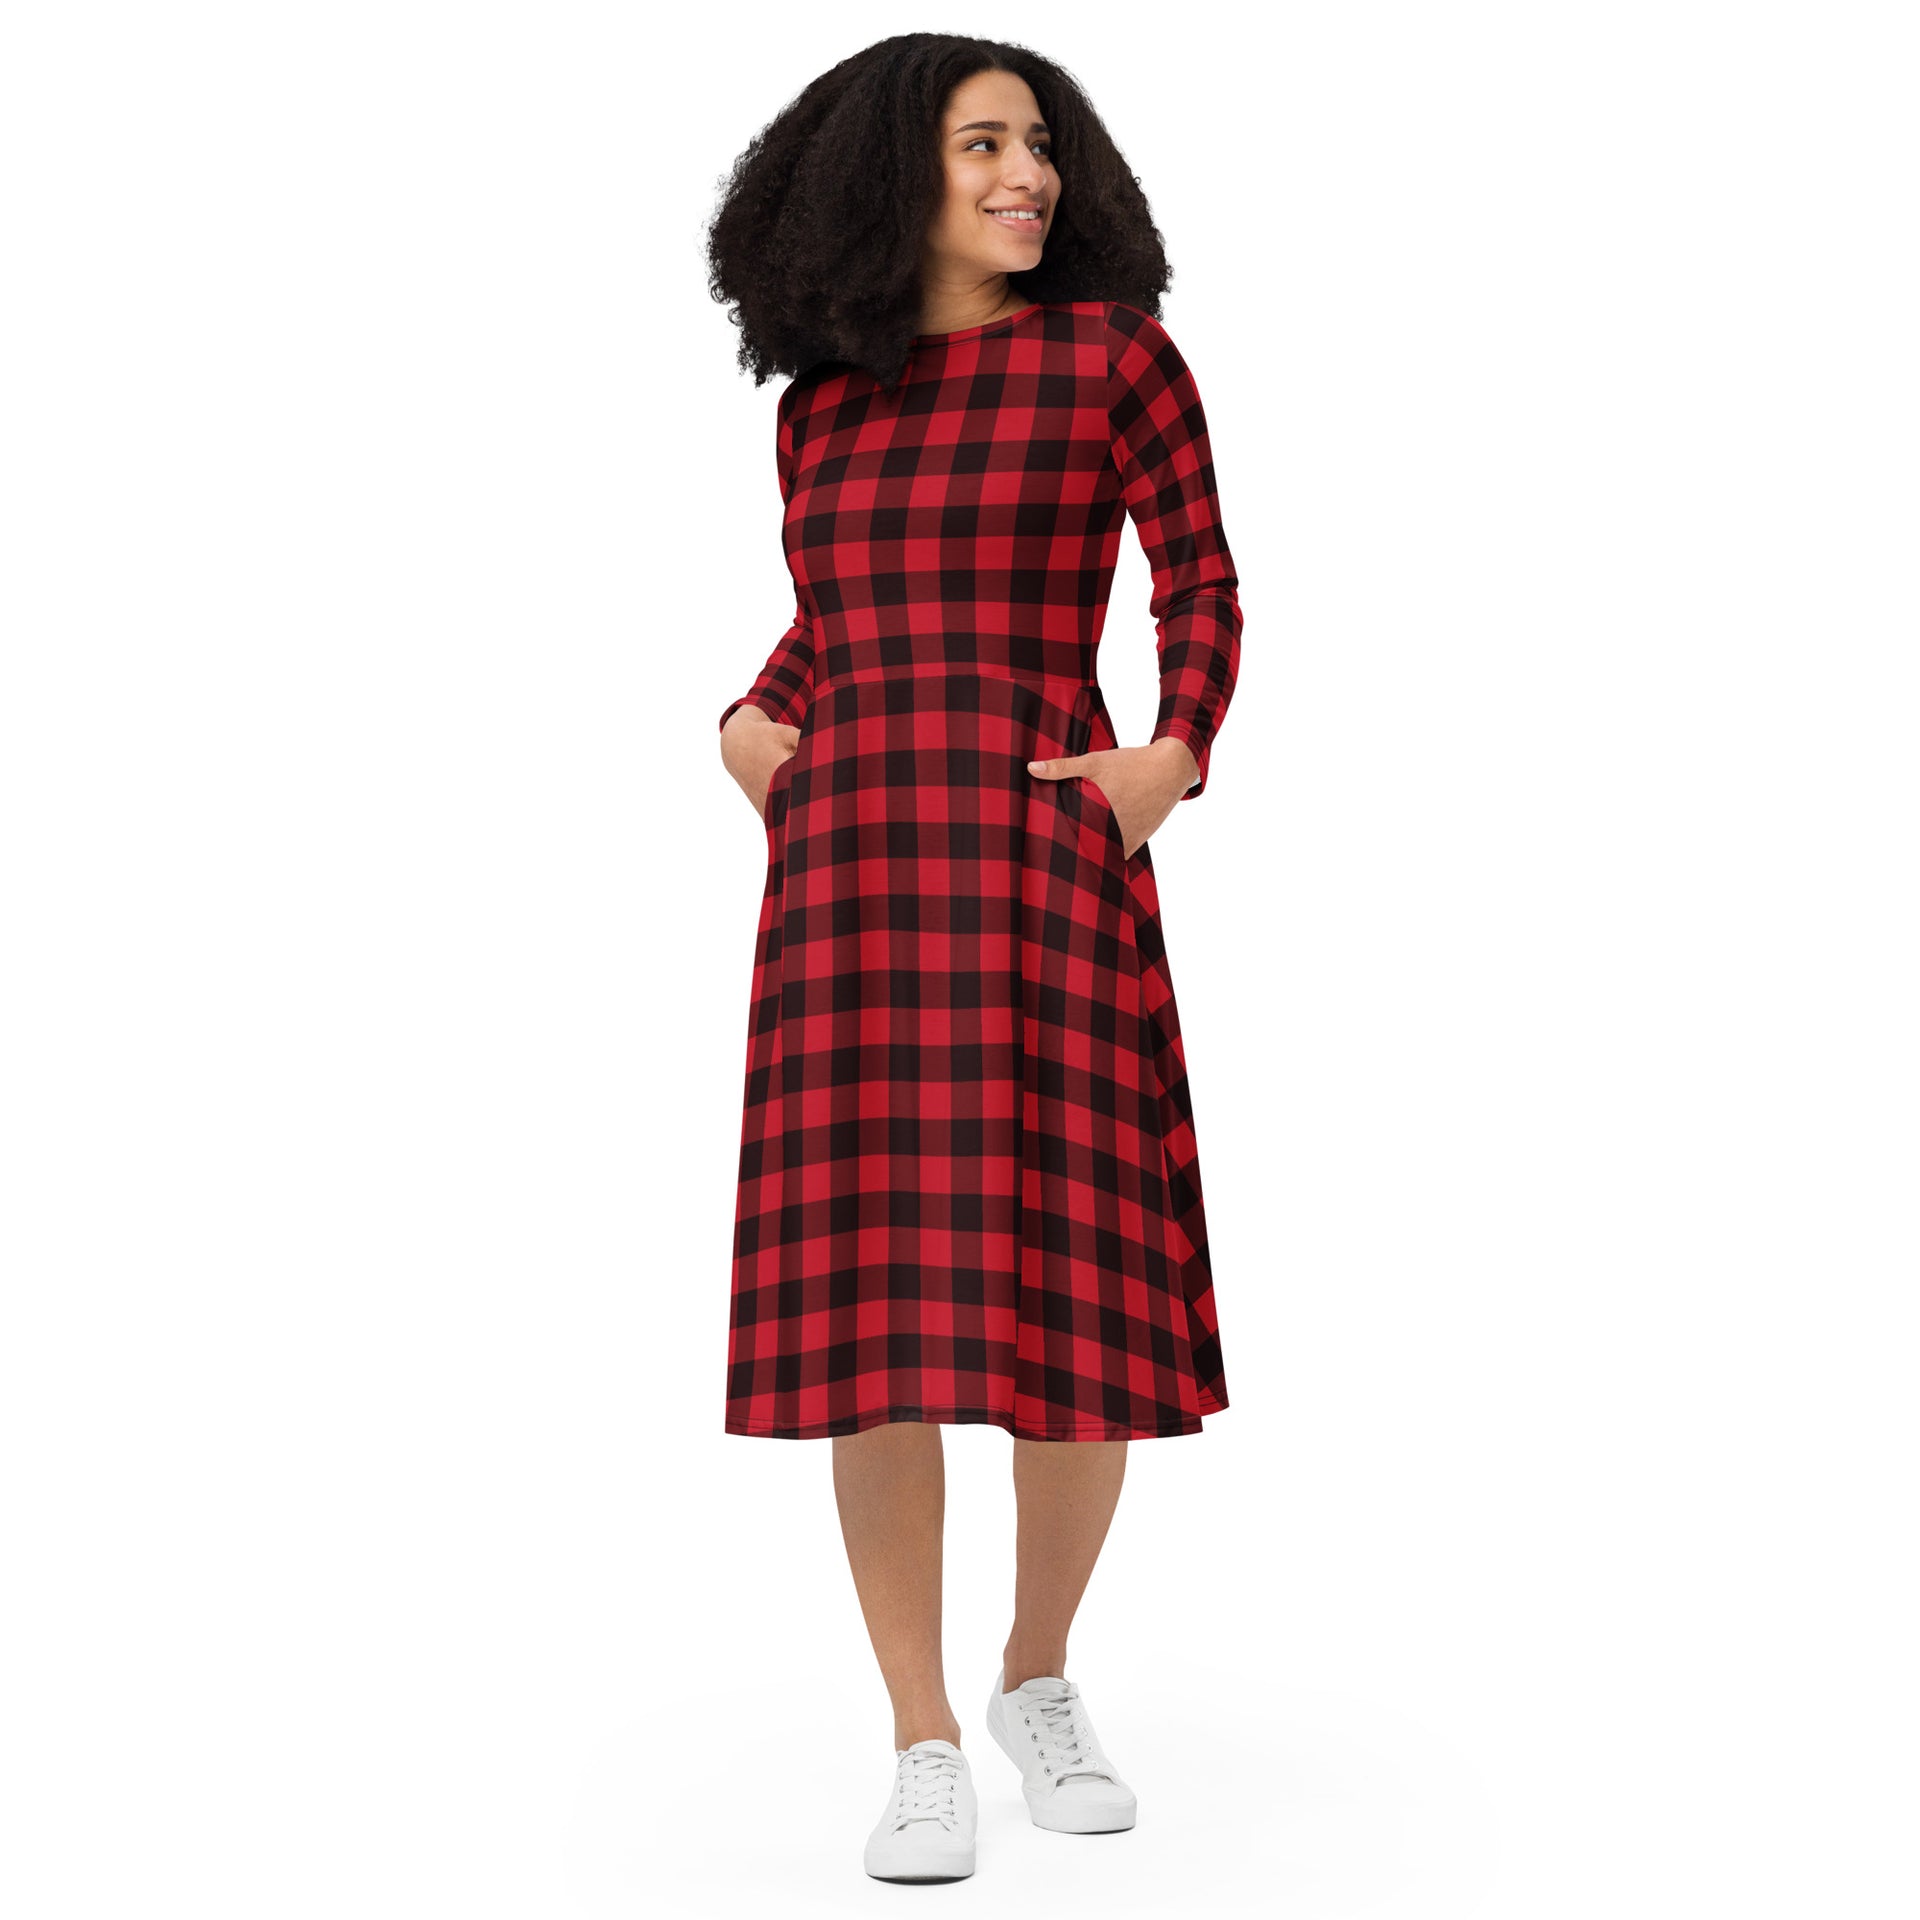 Black Plaid Dress. Midi Tartan Dress. Casual Outfit With Pockets 3 Colors -   Canada